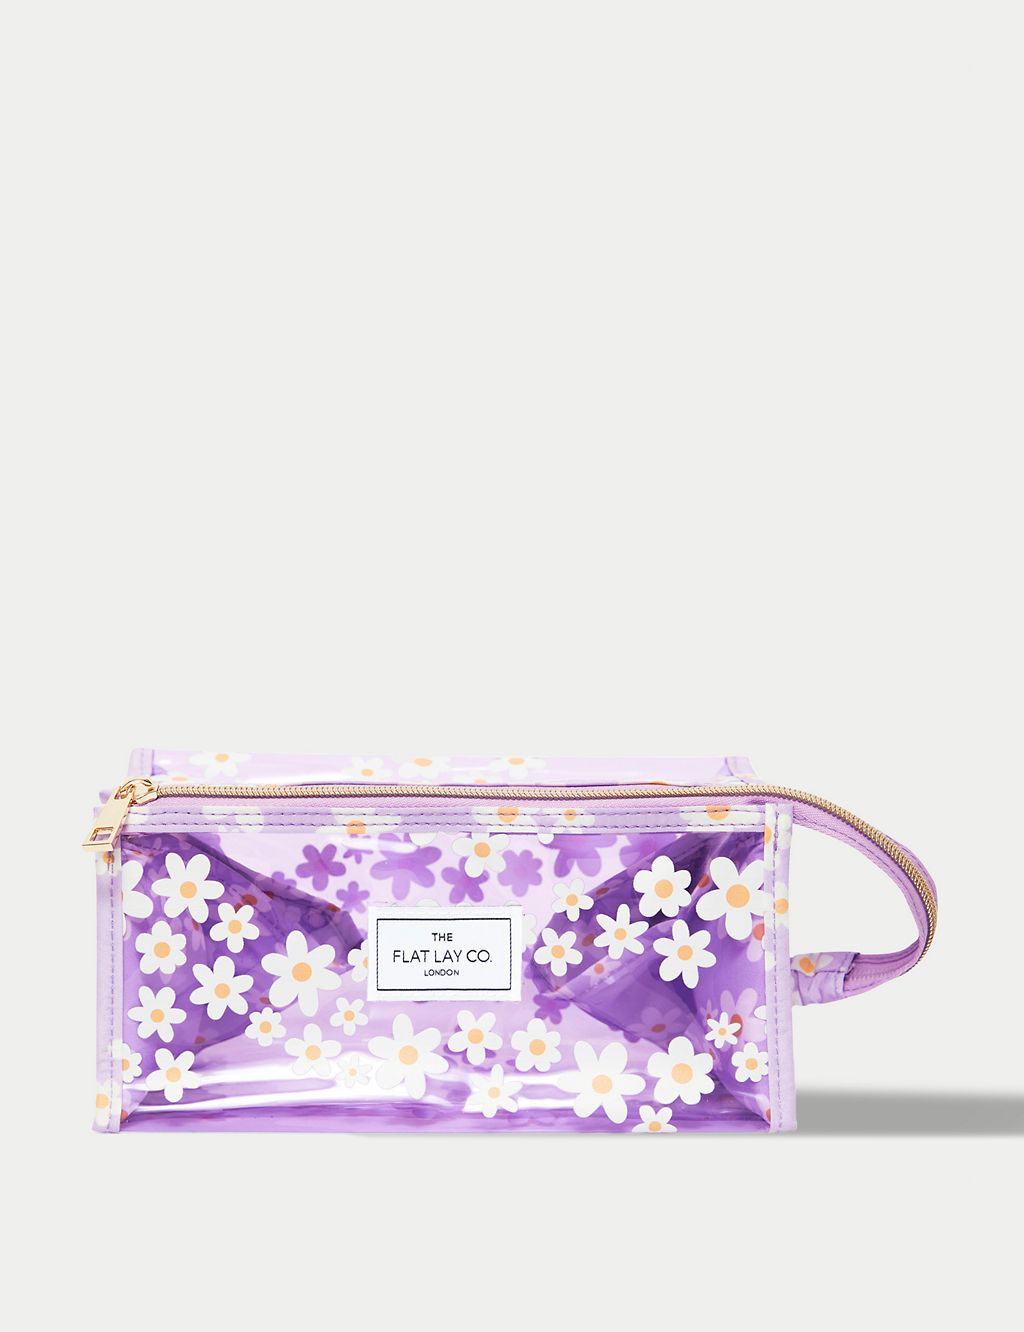 The Flat Lay Co. Makeup Jelly Box Bag in Lilac Daisy 3 of 6